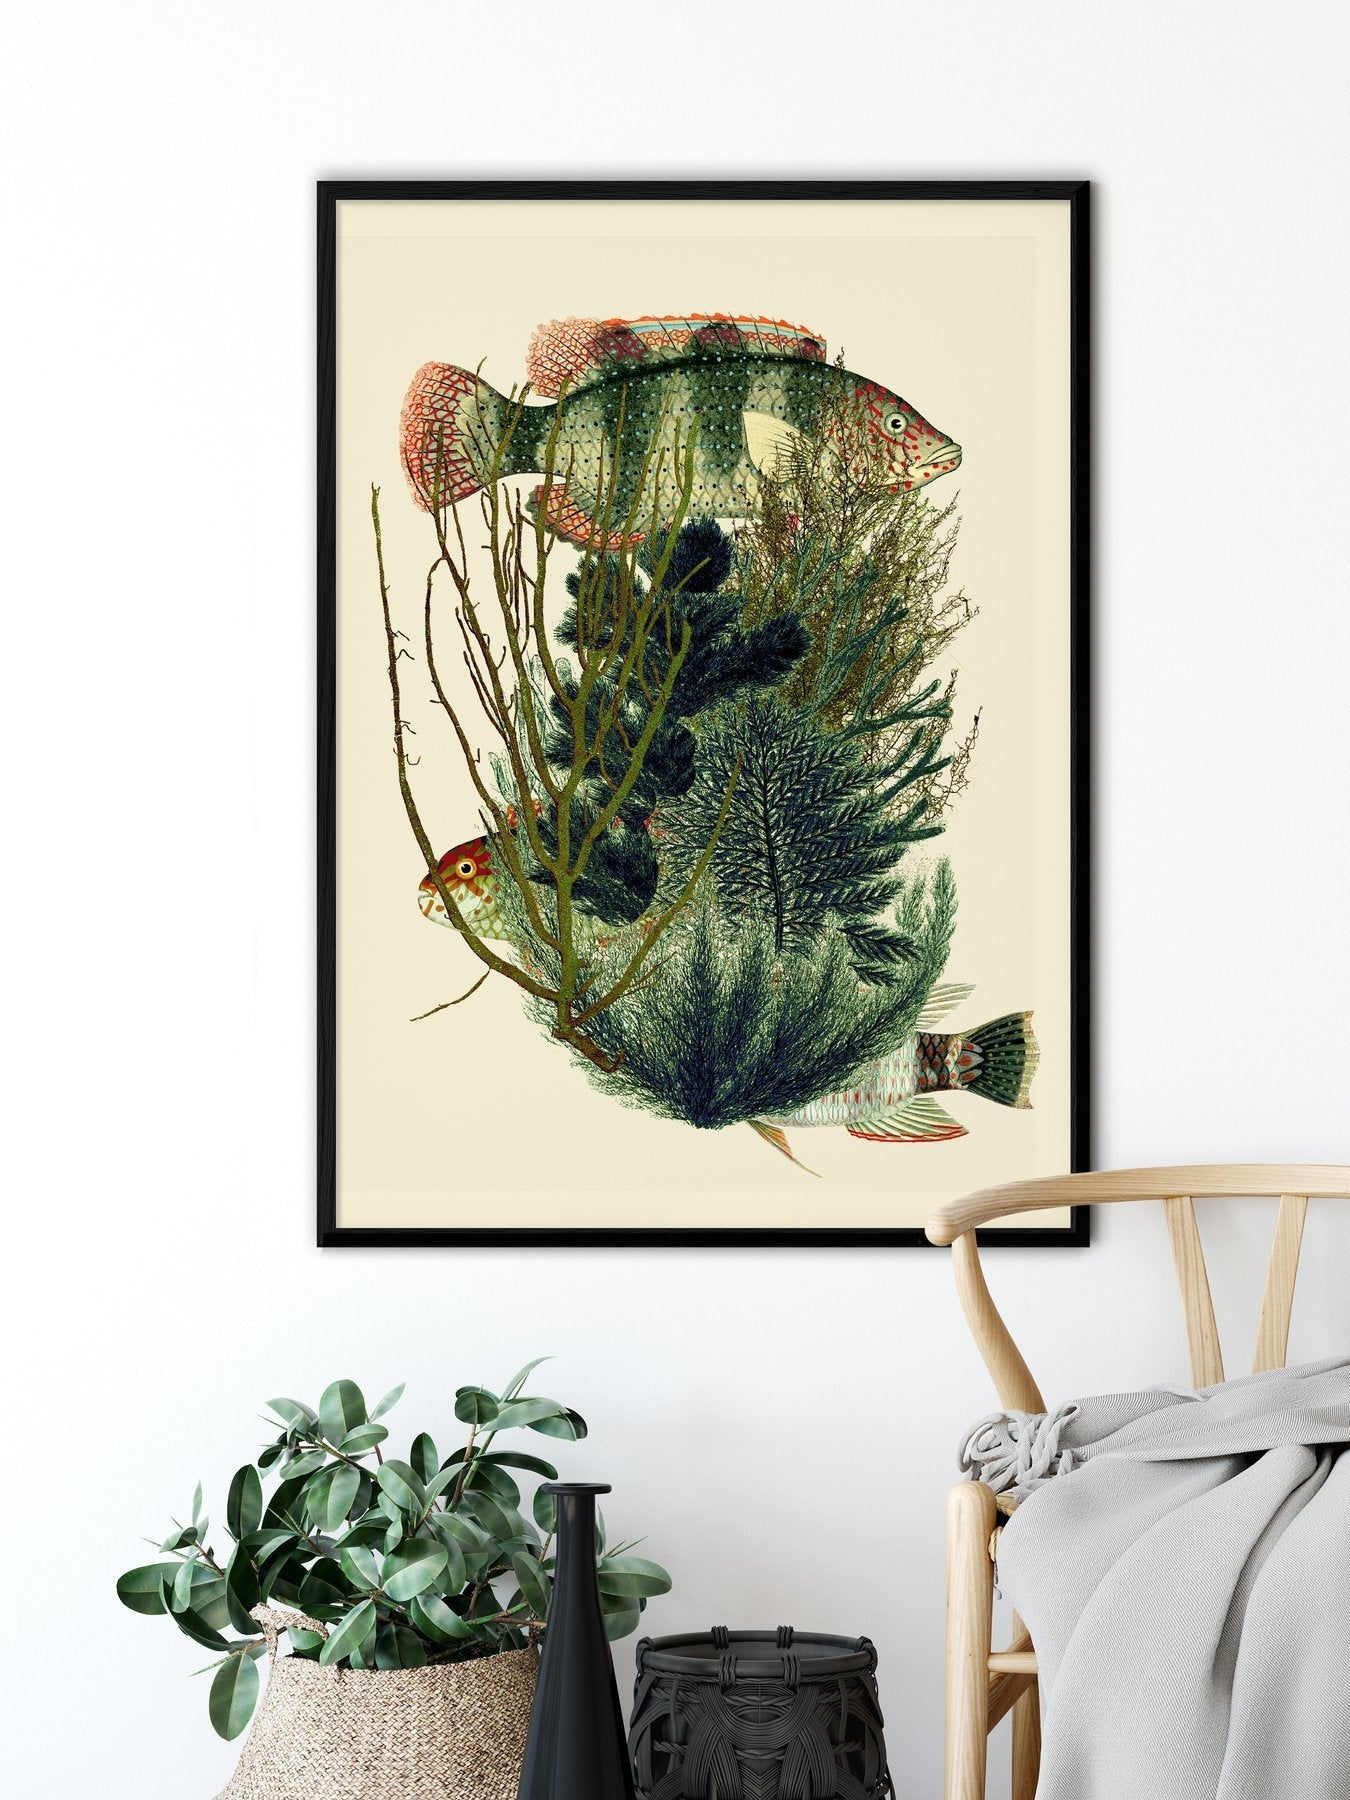 Dybdahl Poster - Green Fishes - Art Prints - Dybdahl - Brand_Dybdahl - Home_Decor - KTFWHS - New Arrivals - Fish_and_weeds_5602_styling_1800x1800_b18b4724-9f05-41c9-bae4-23c056cee021